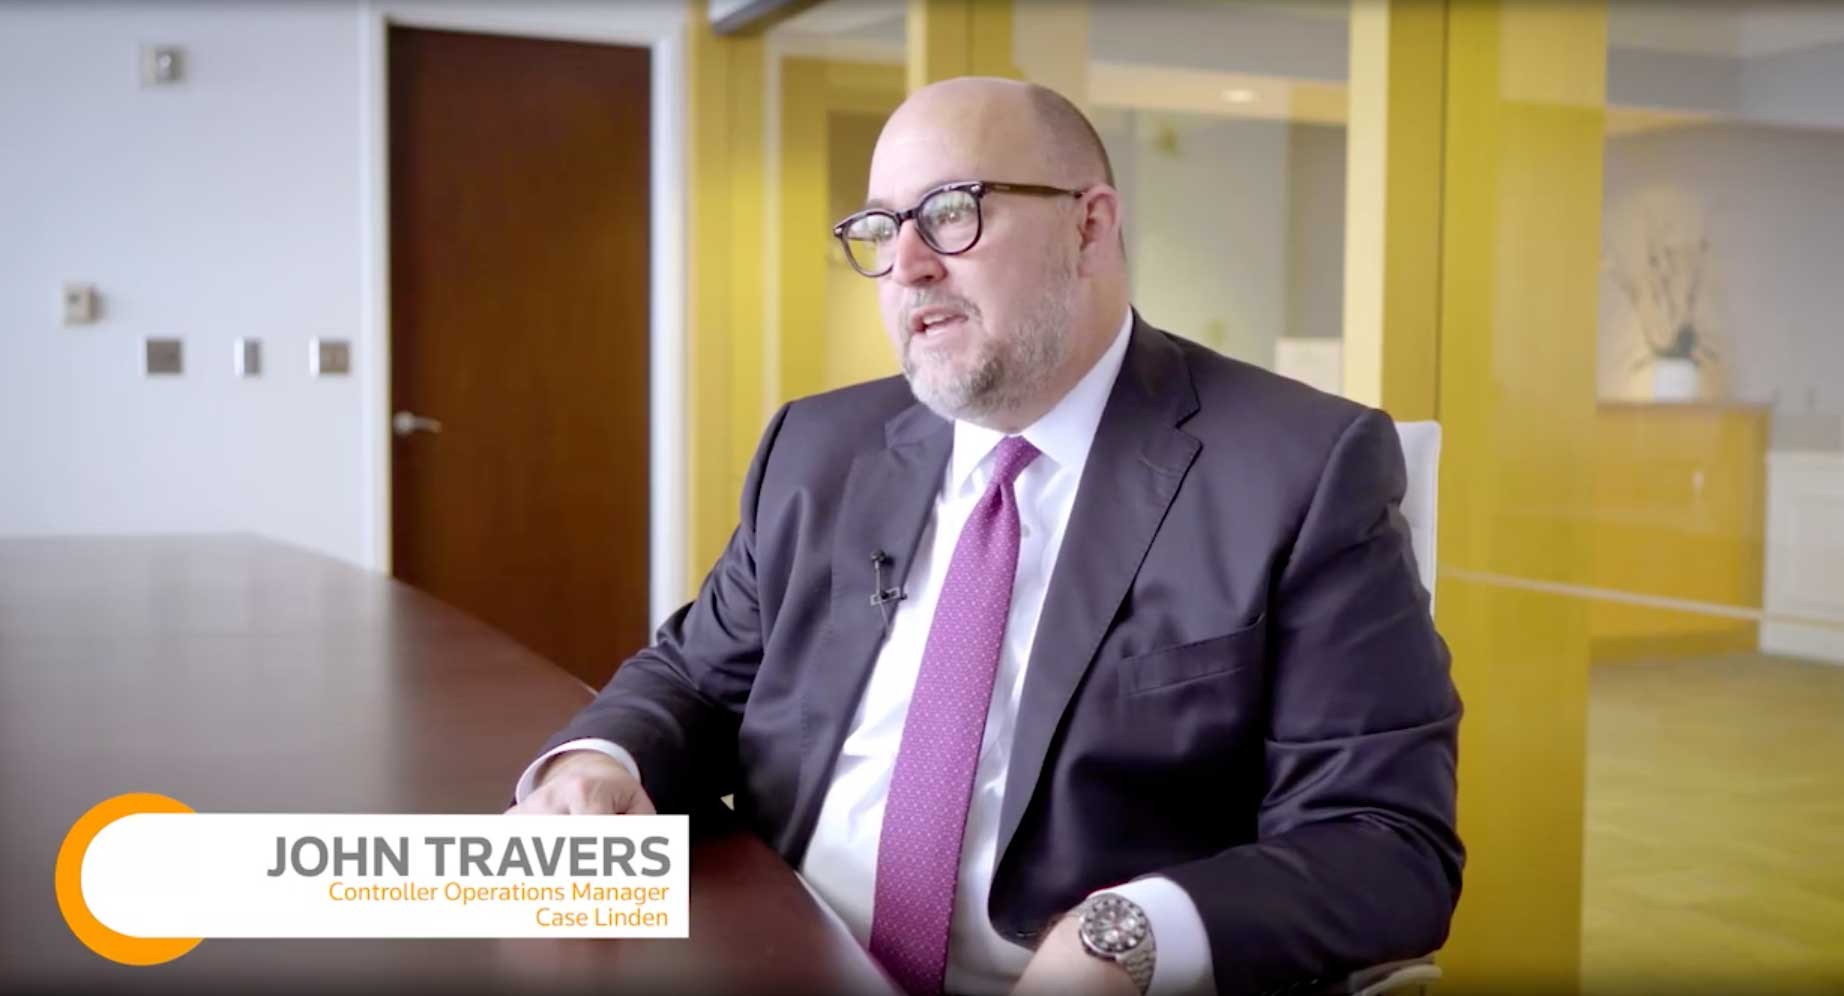 John Travers talks about his law firm and using ProLaw